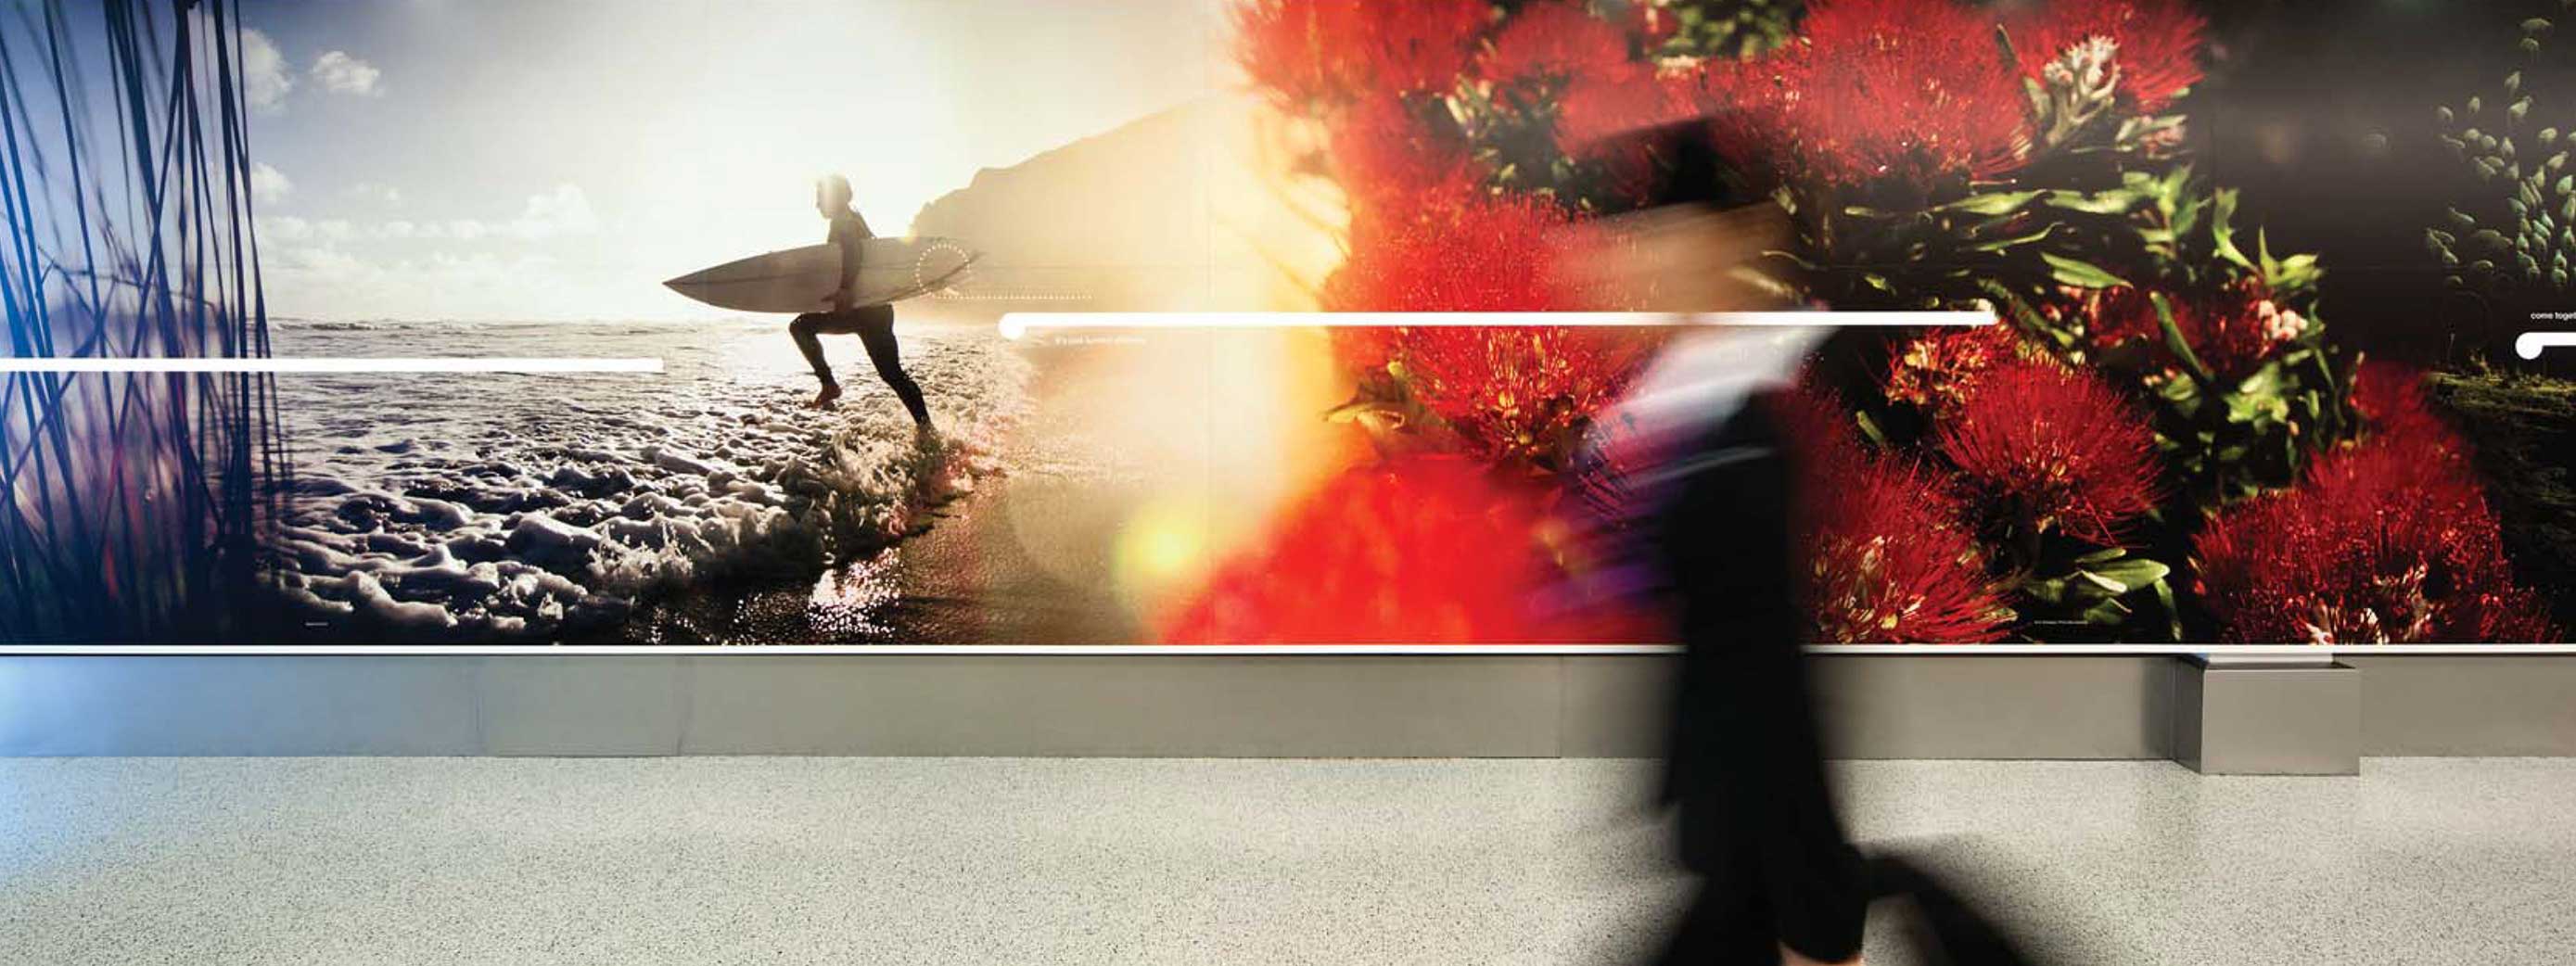 Floor to ceiling photos of New Zealand scenery as your arrive at Auckland international airport